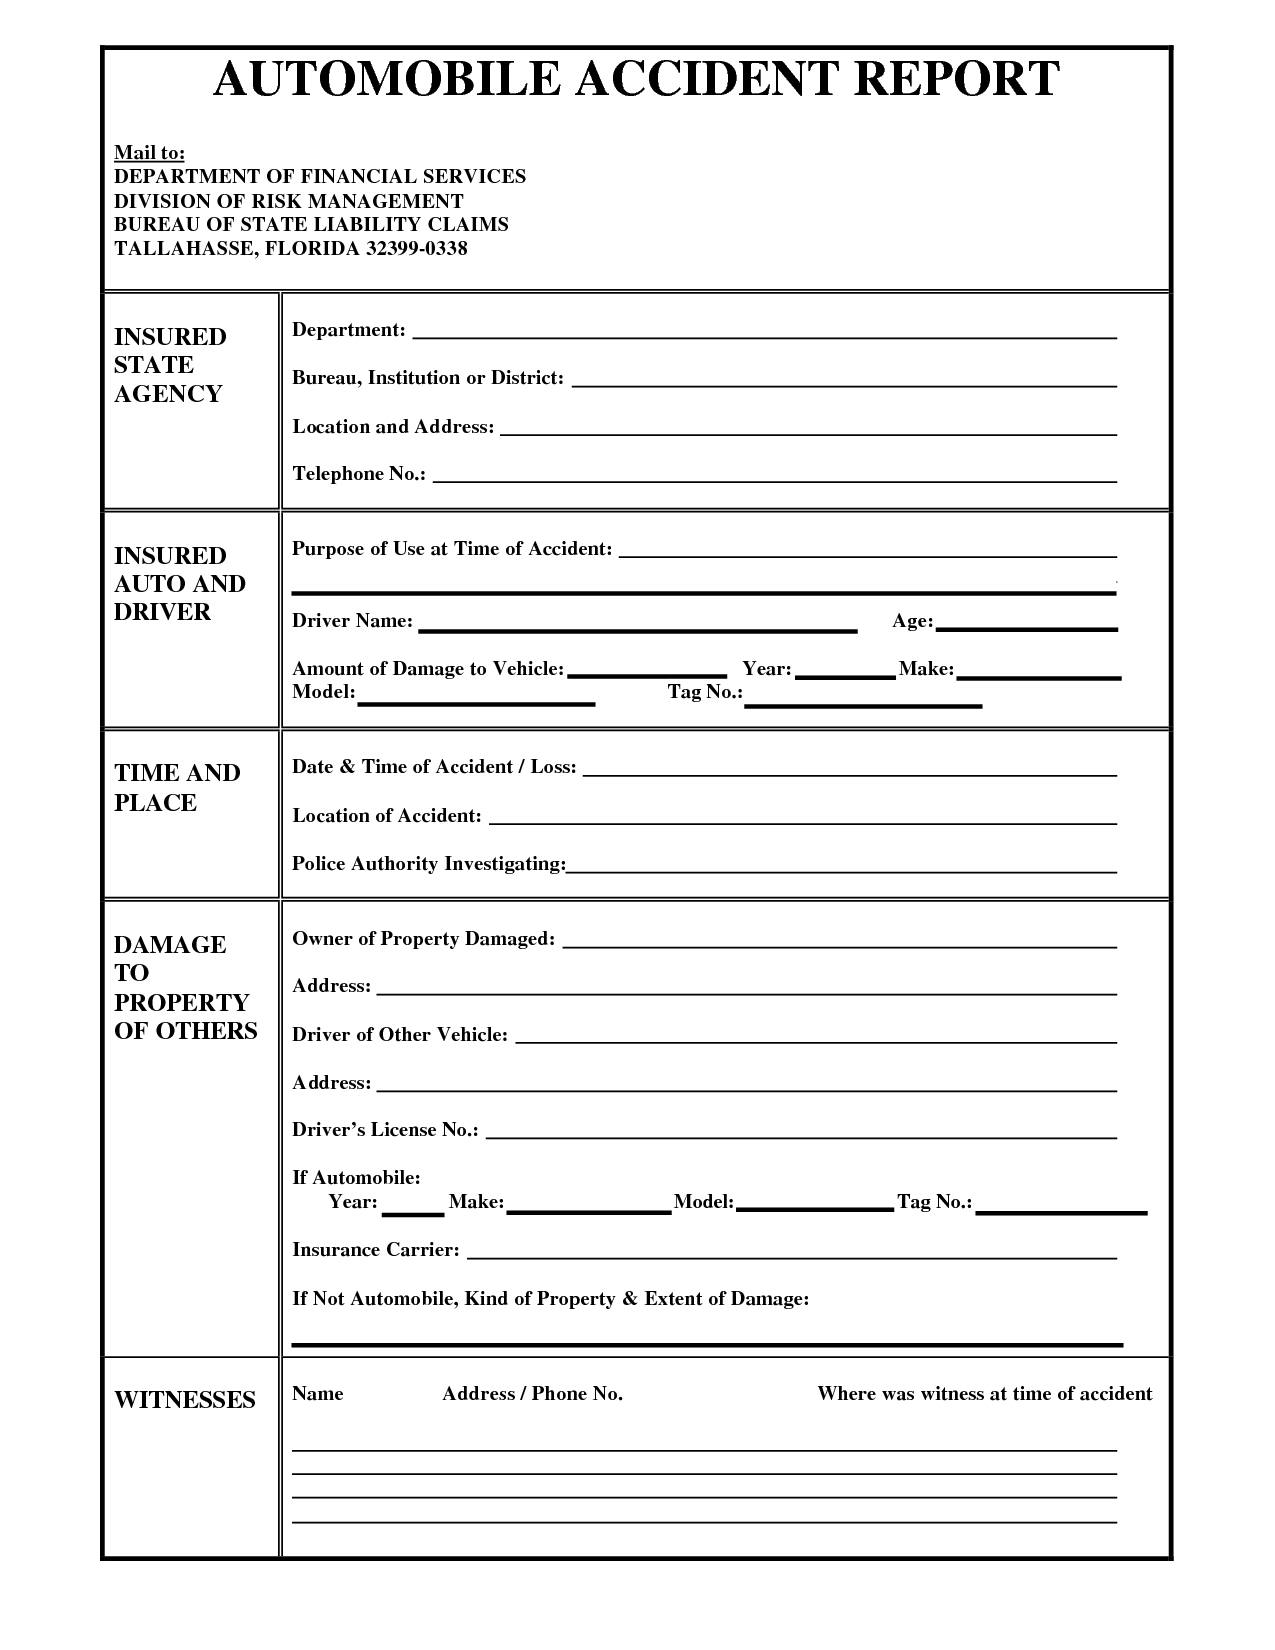 020 Vehicle Accident Report Form Template 504334 Car With Regard To Motor Vehicle Accident Report Form Template